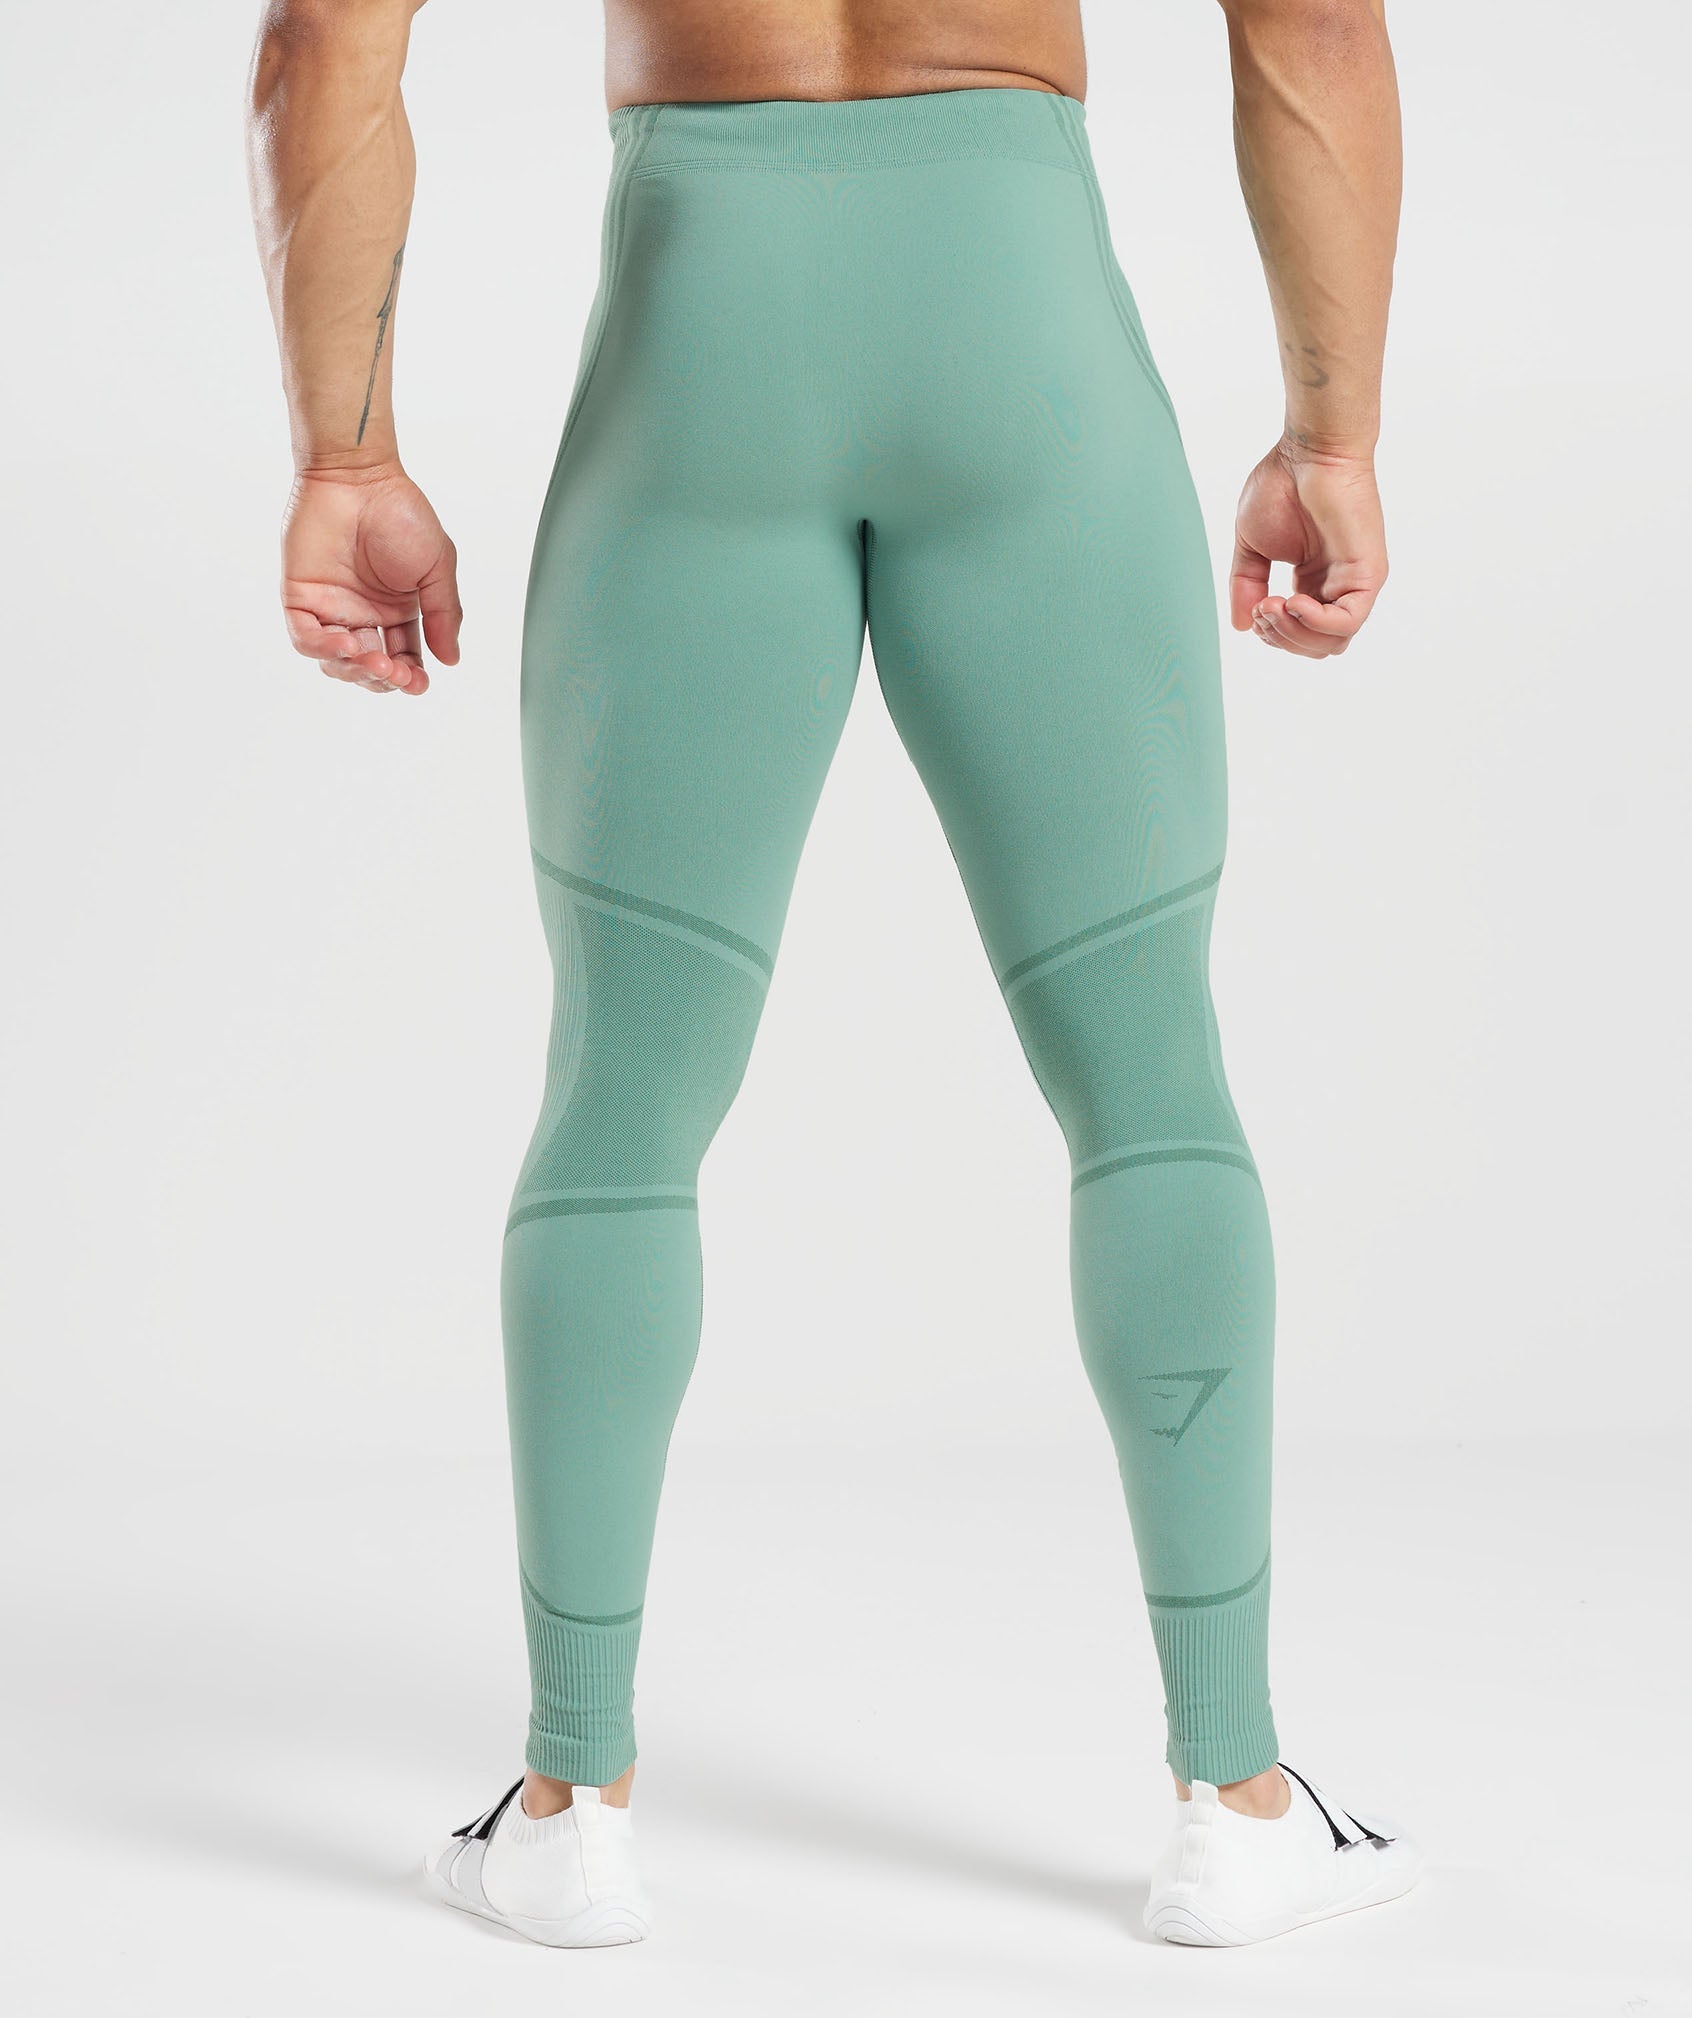 315 Seamless Tights in Ink Teal/Jewel Green - view 2